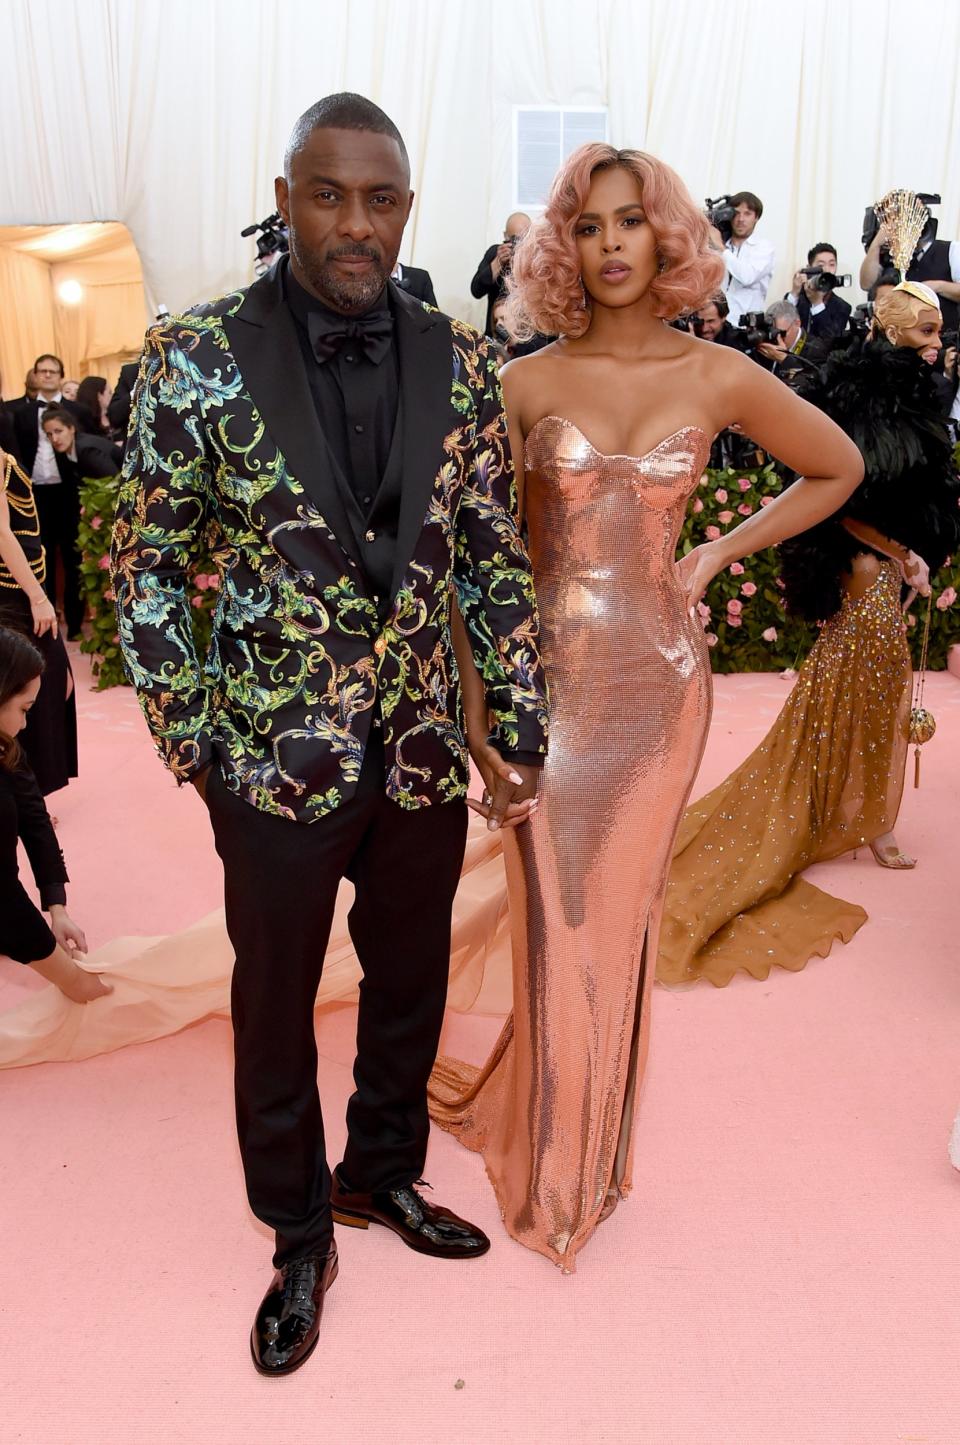 Idris Elba and Sabrina Dhowre make their Met Gala debut as a married couple days after Moroccan wedding